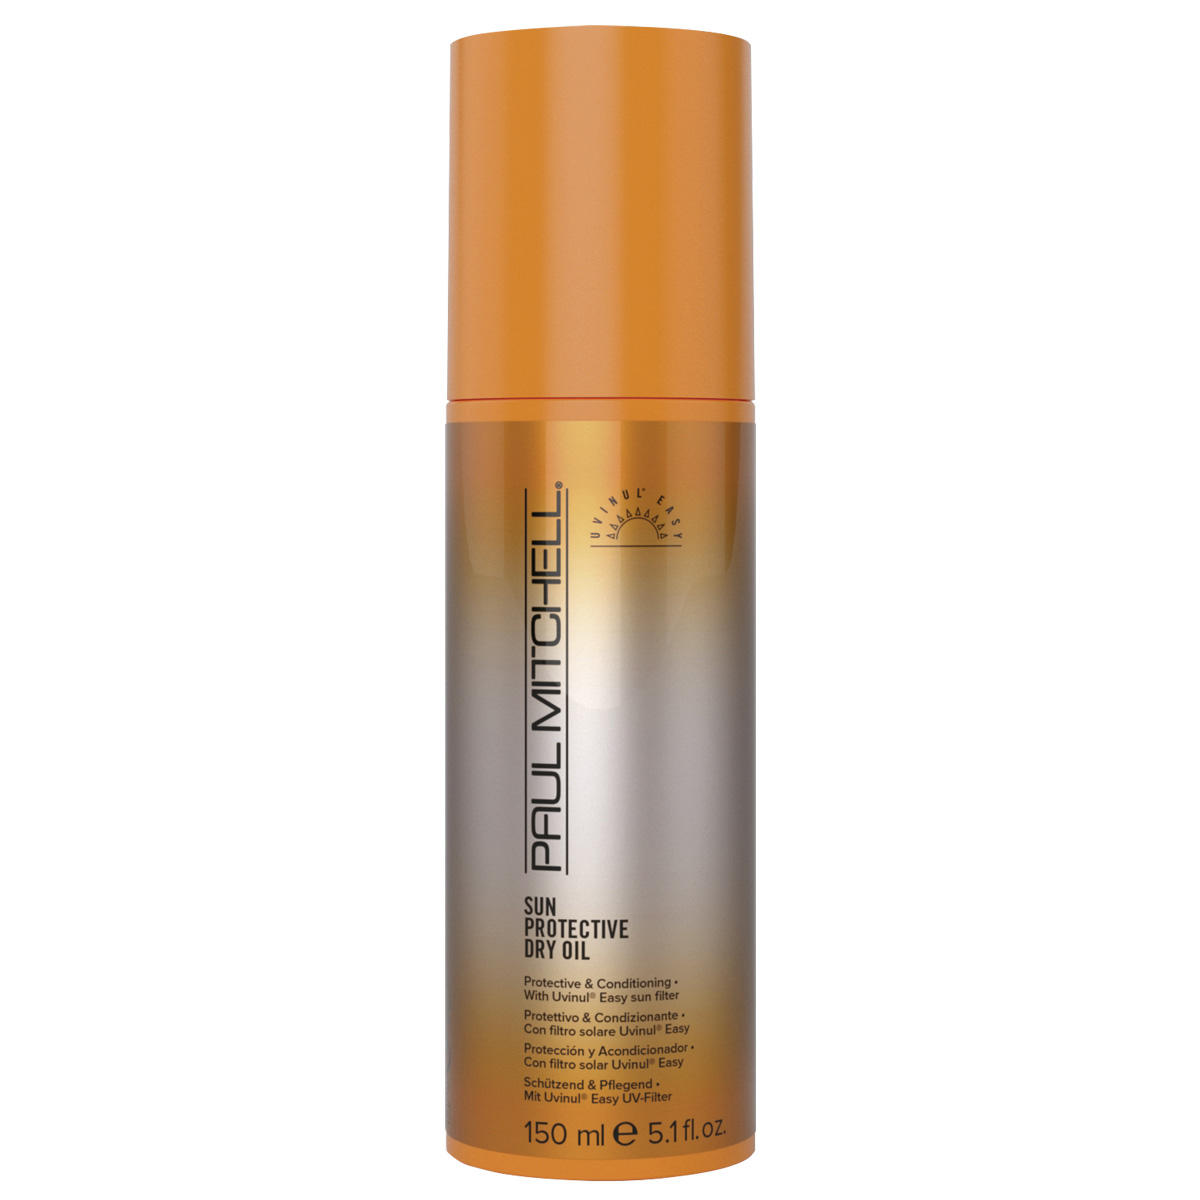 Paul Mitchell Sun Protective Dry Oil Limited Edition 150 ml - 1